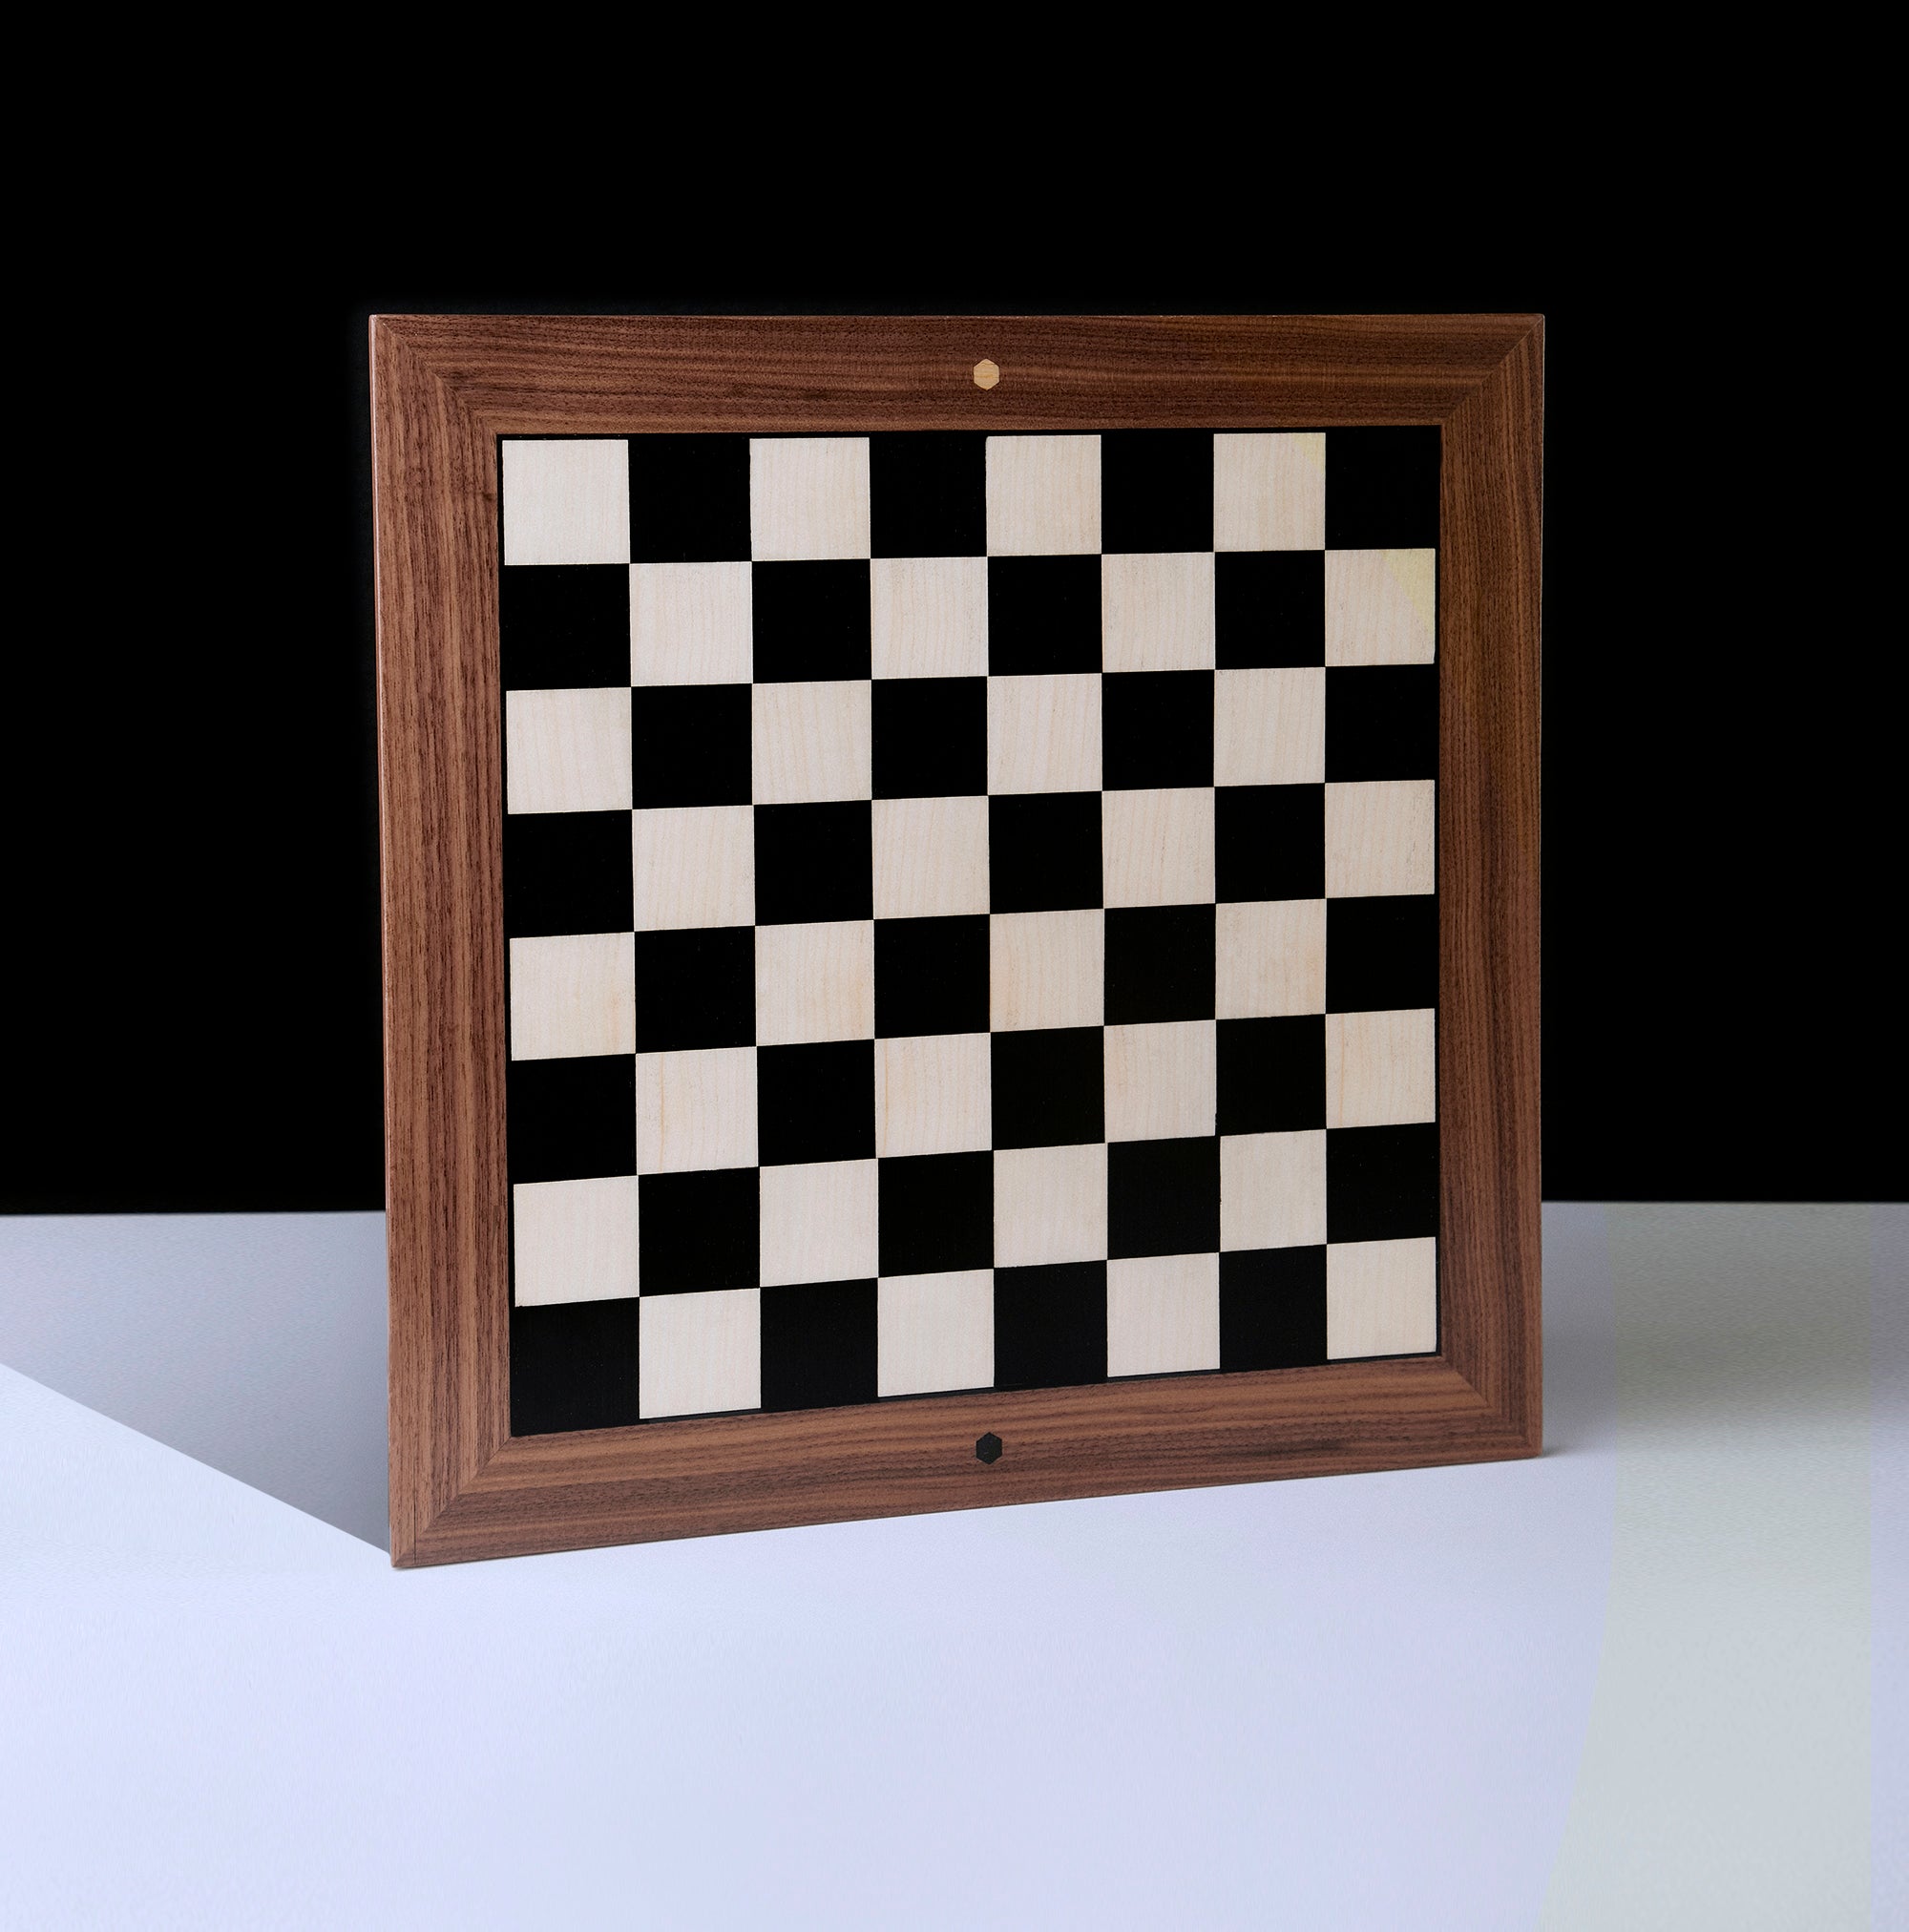 World Chess Set (Home Edition with Bauhaus Board) - buy online